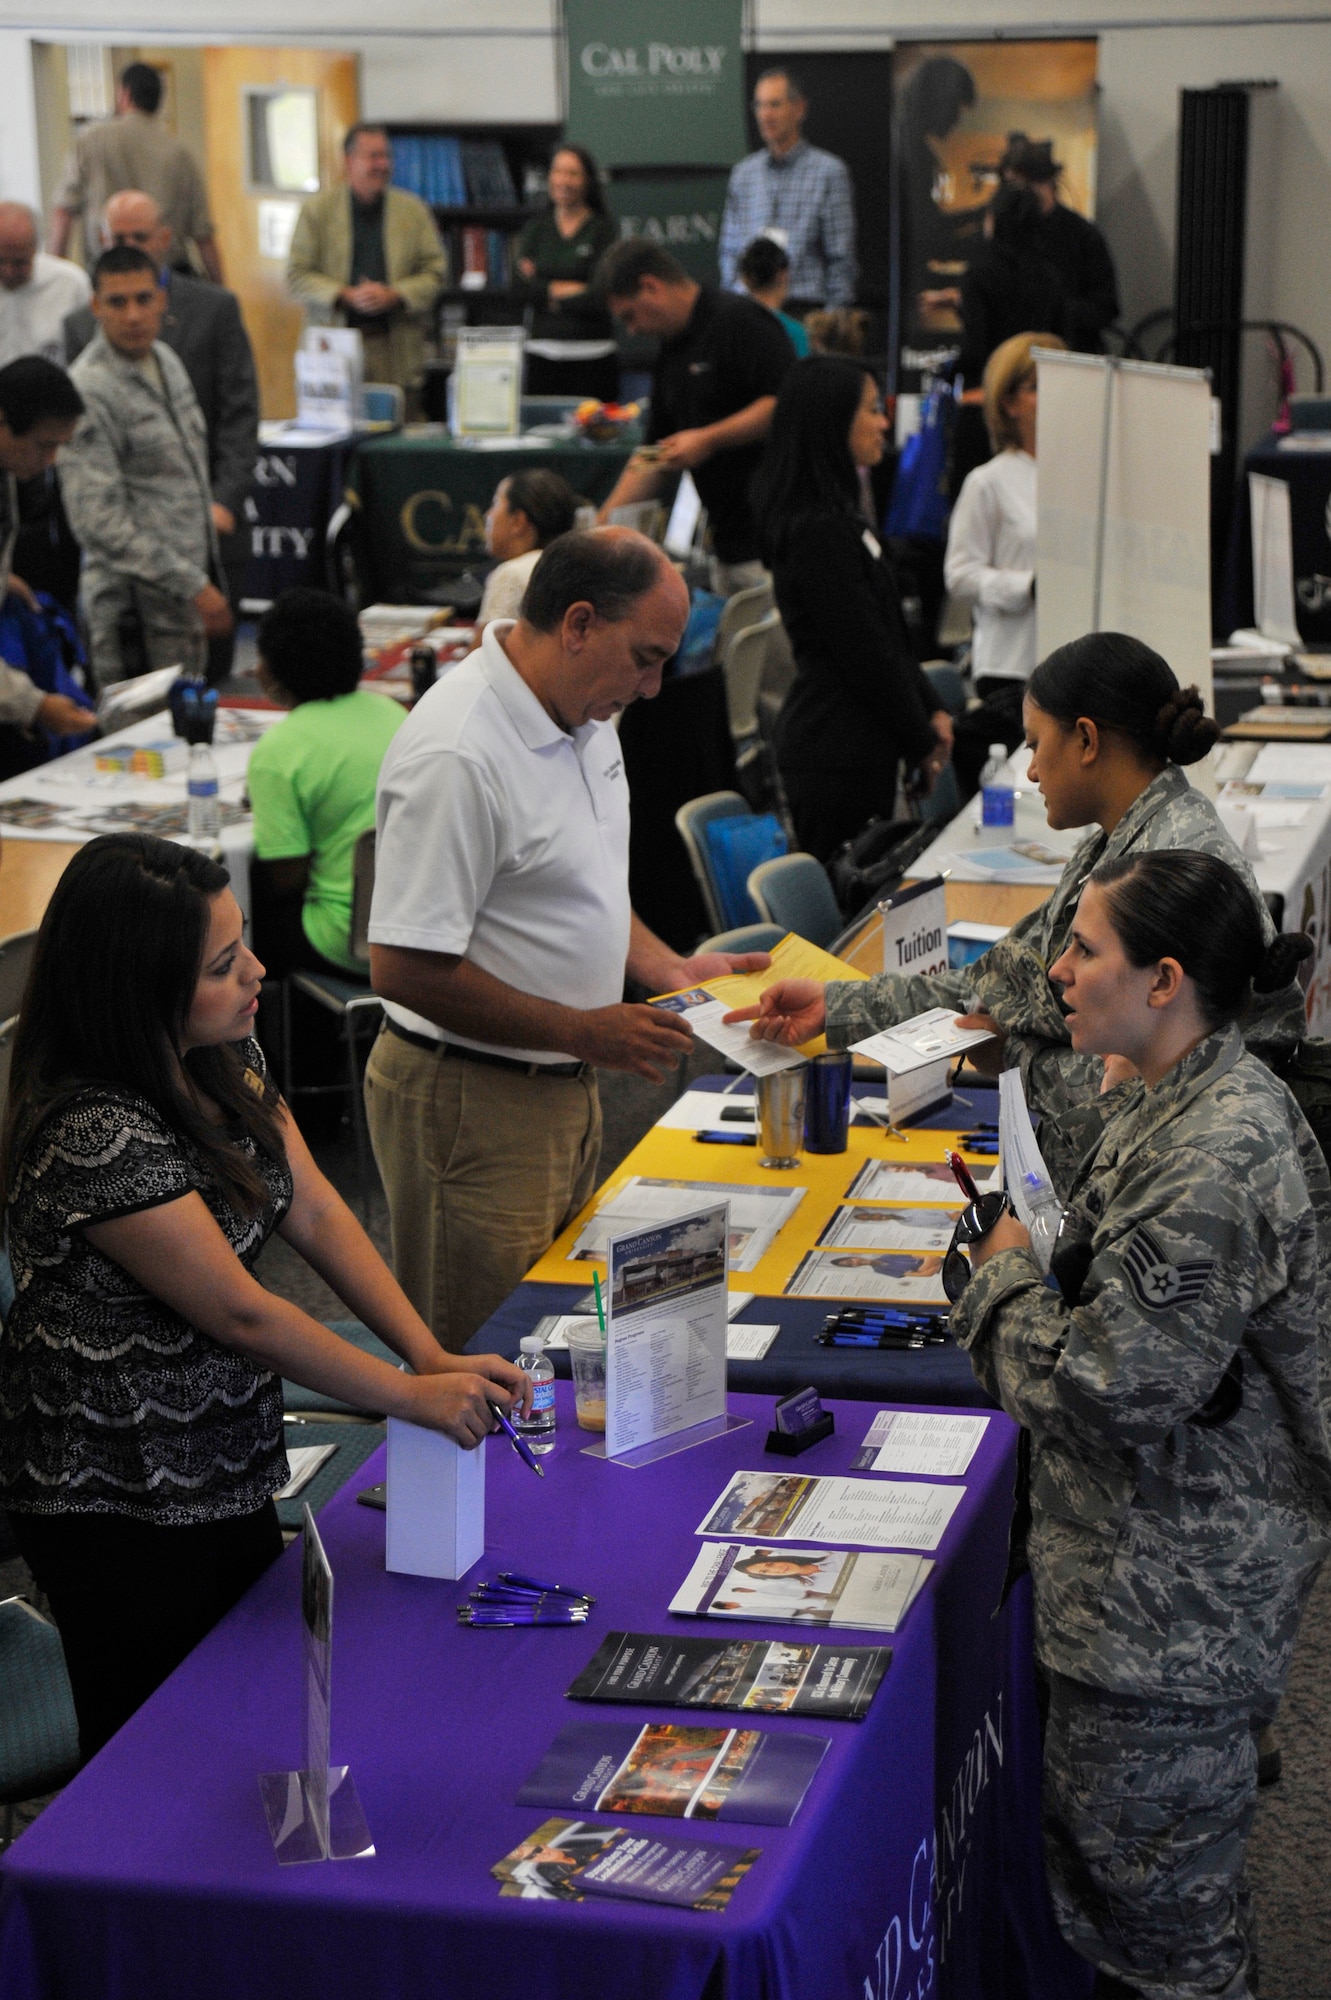 VANDENBERG AIR FORCE BASE, Calif. -- Team V members browse displays and speak with representatives from various universities and educational programs during an education fair here Thursday, August 15, 2013. The 30th Force Support Squadron's Education Center hosts this annual event, inviting educational institutions from across the country to Vandenberg, to provide Team V a one-stop venue to research their educational pursuits. (U.S. Air Force photo/Michael Peterson)